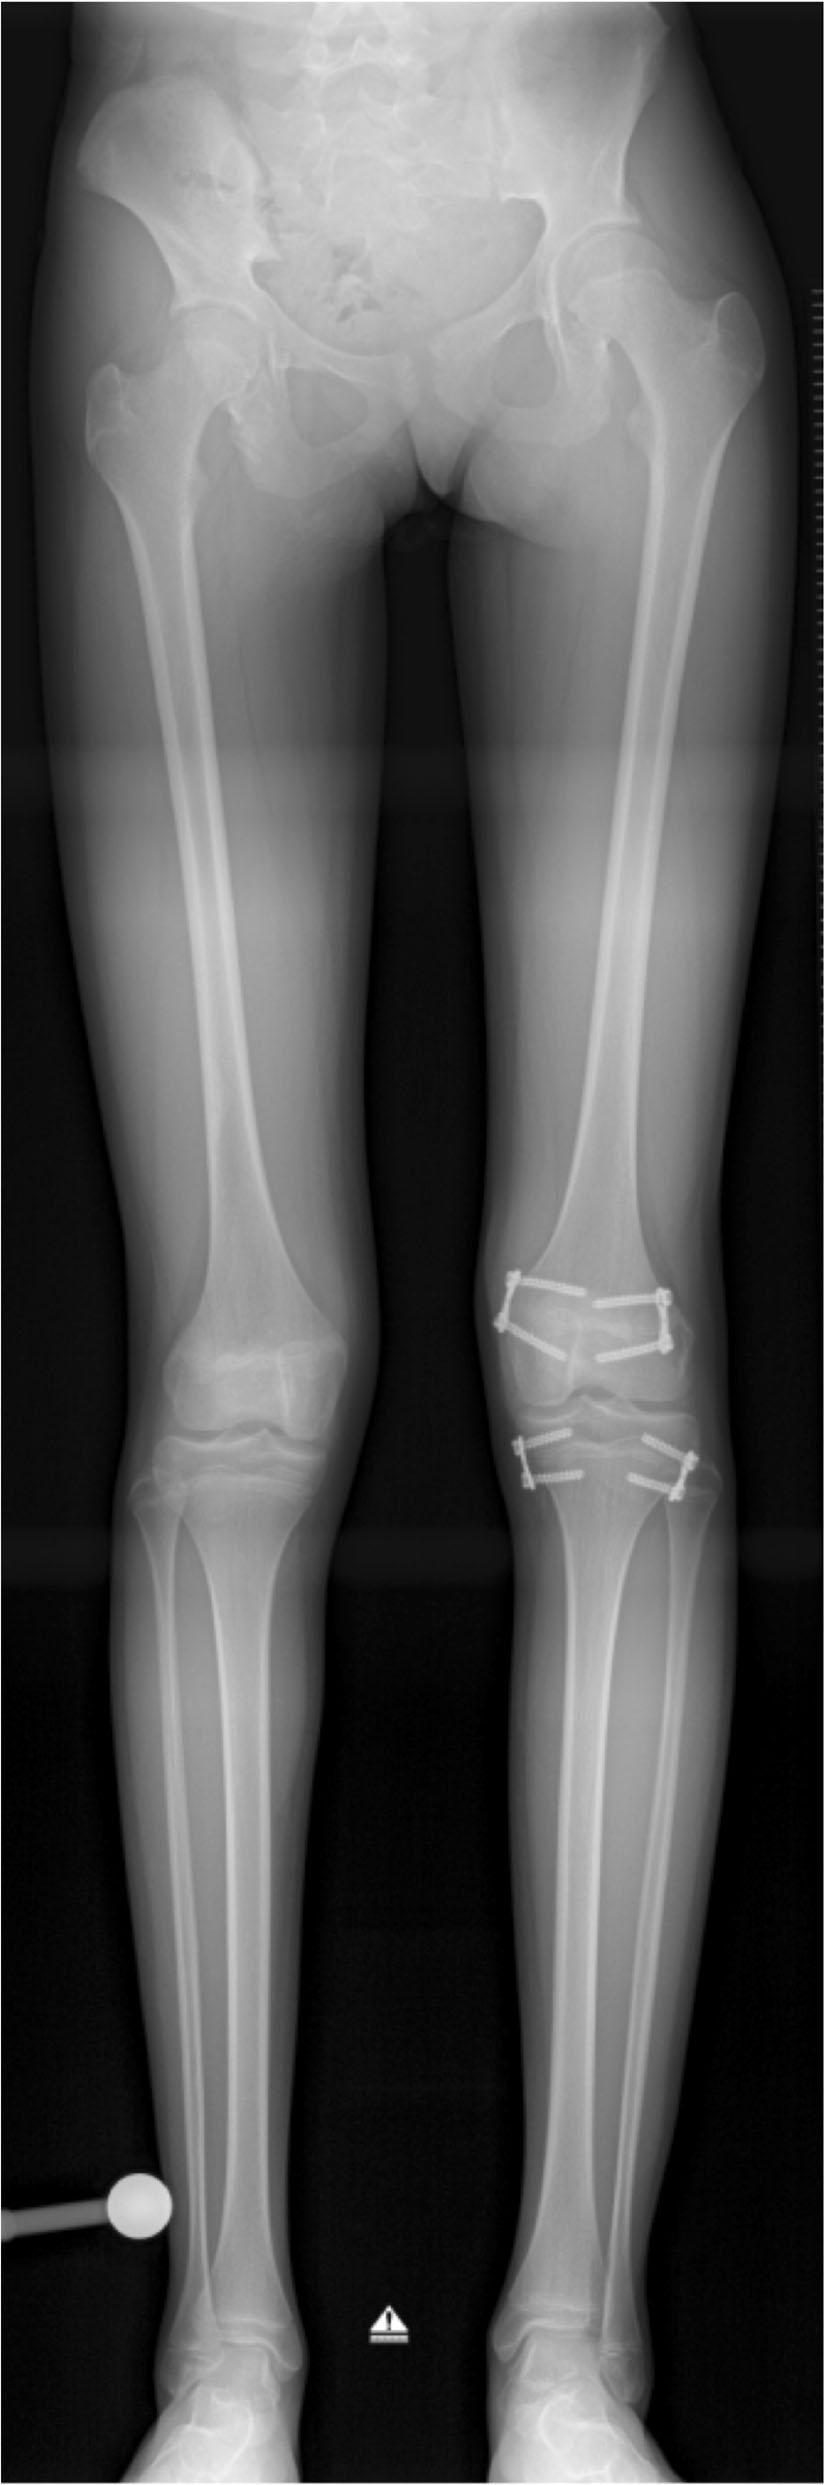 Borbas et al. Journal of Orthopaedic Surgery and Research (2019) 14:99 Page 3 of 7 Fig. 1 Long-standing X-ray of a patient with limb length discrepancy.